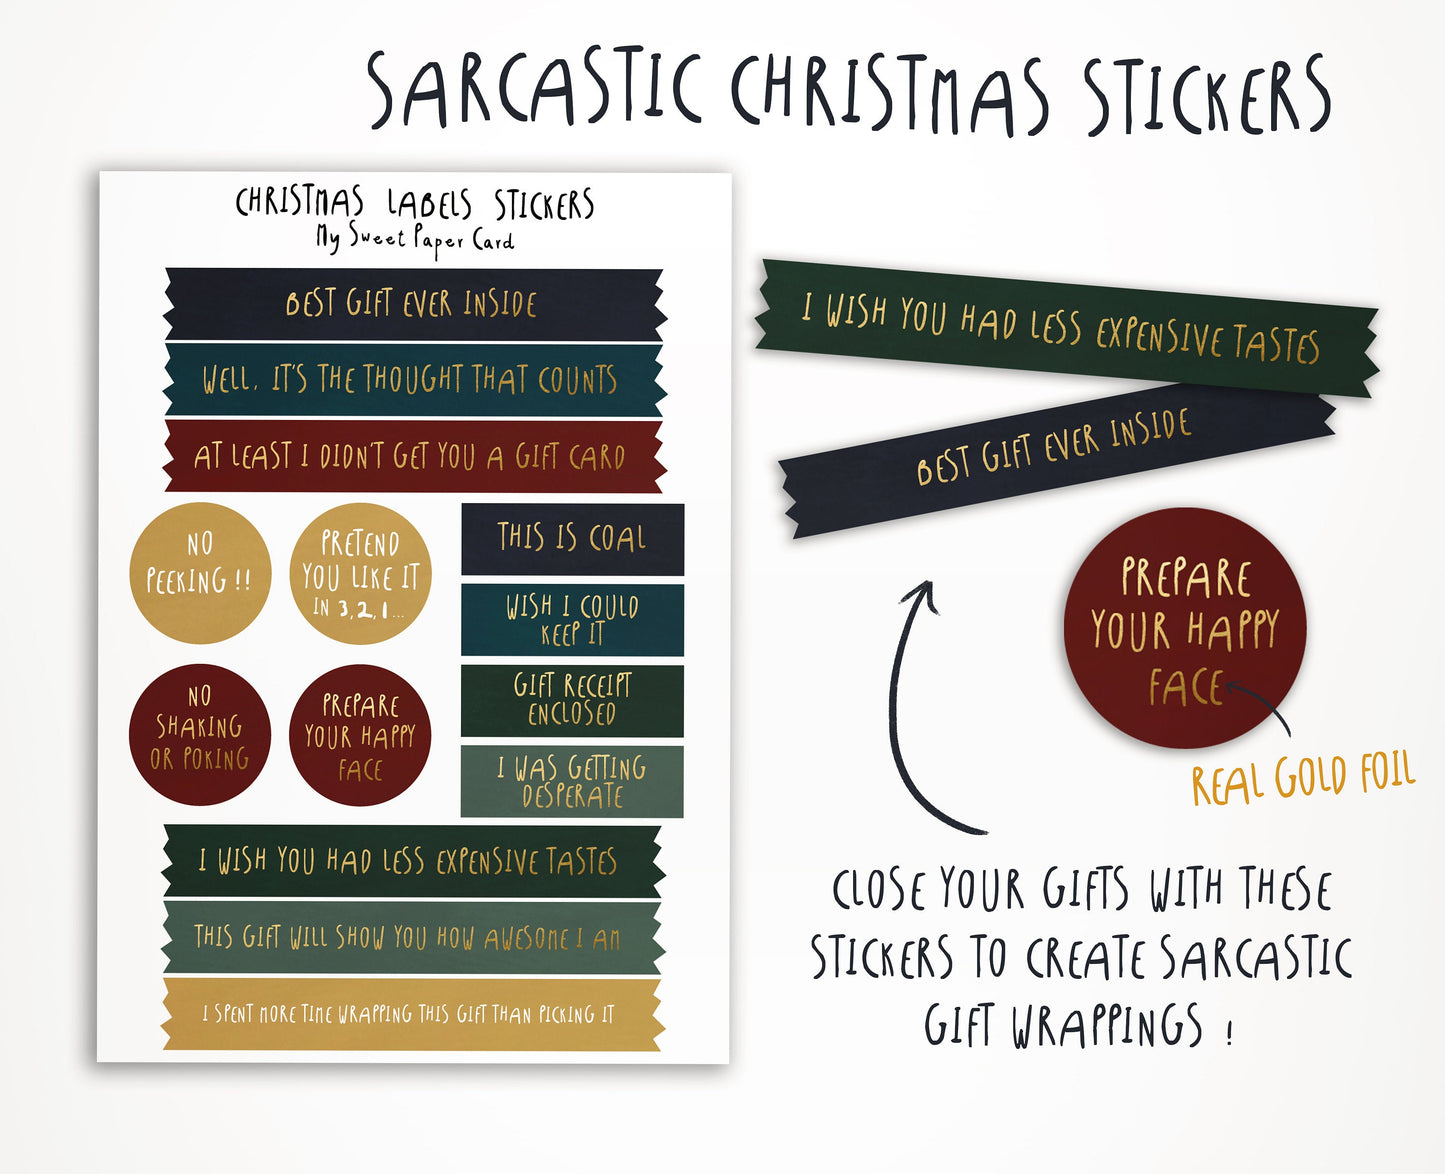 DISCONTINUED - Funny Christmas Stickers Labels - Sarcastic stickers to create funny gift wrappings